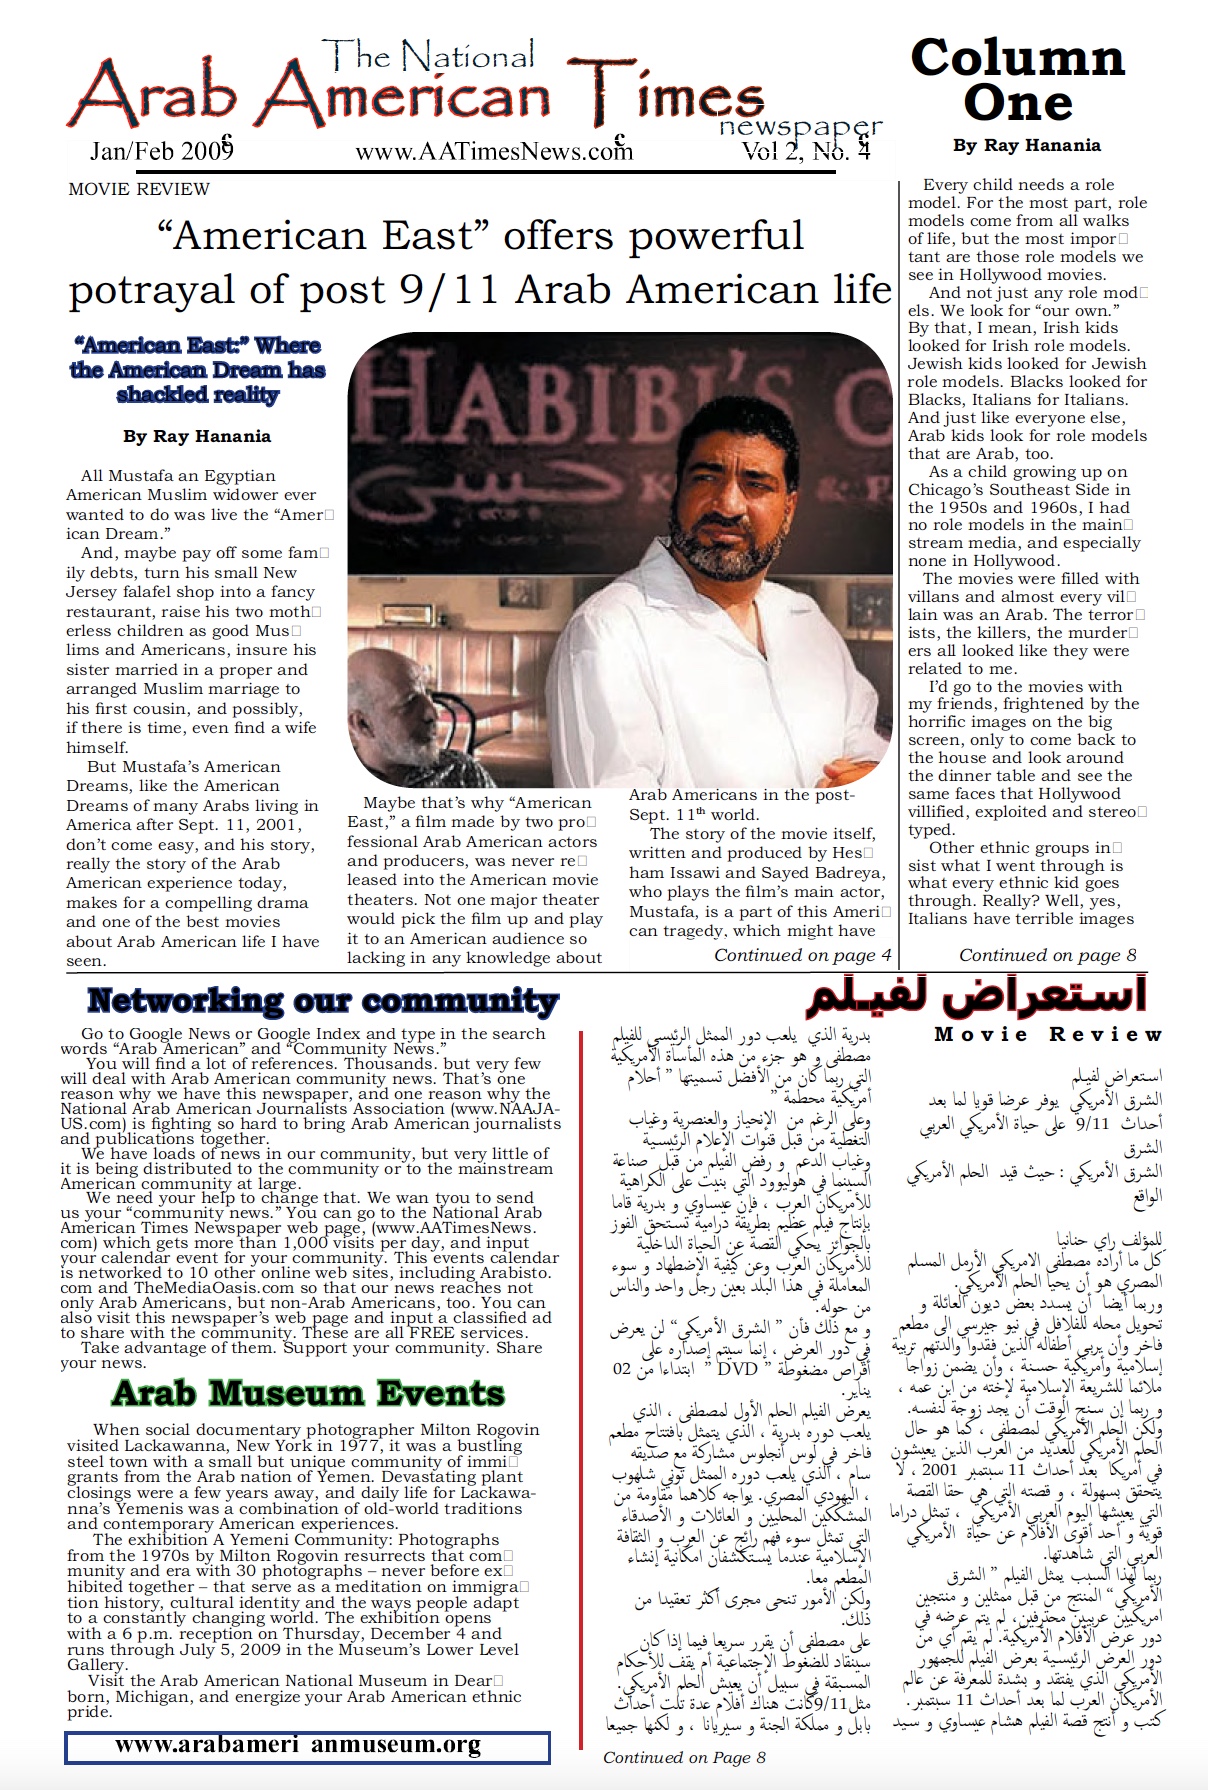 Front page of the former Arab American Times newspaper